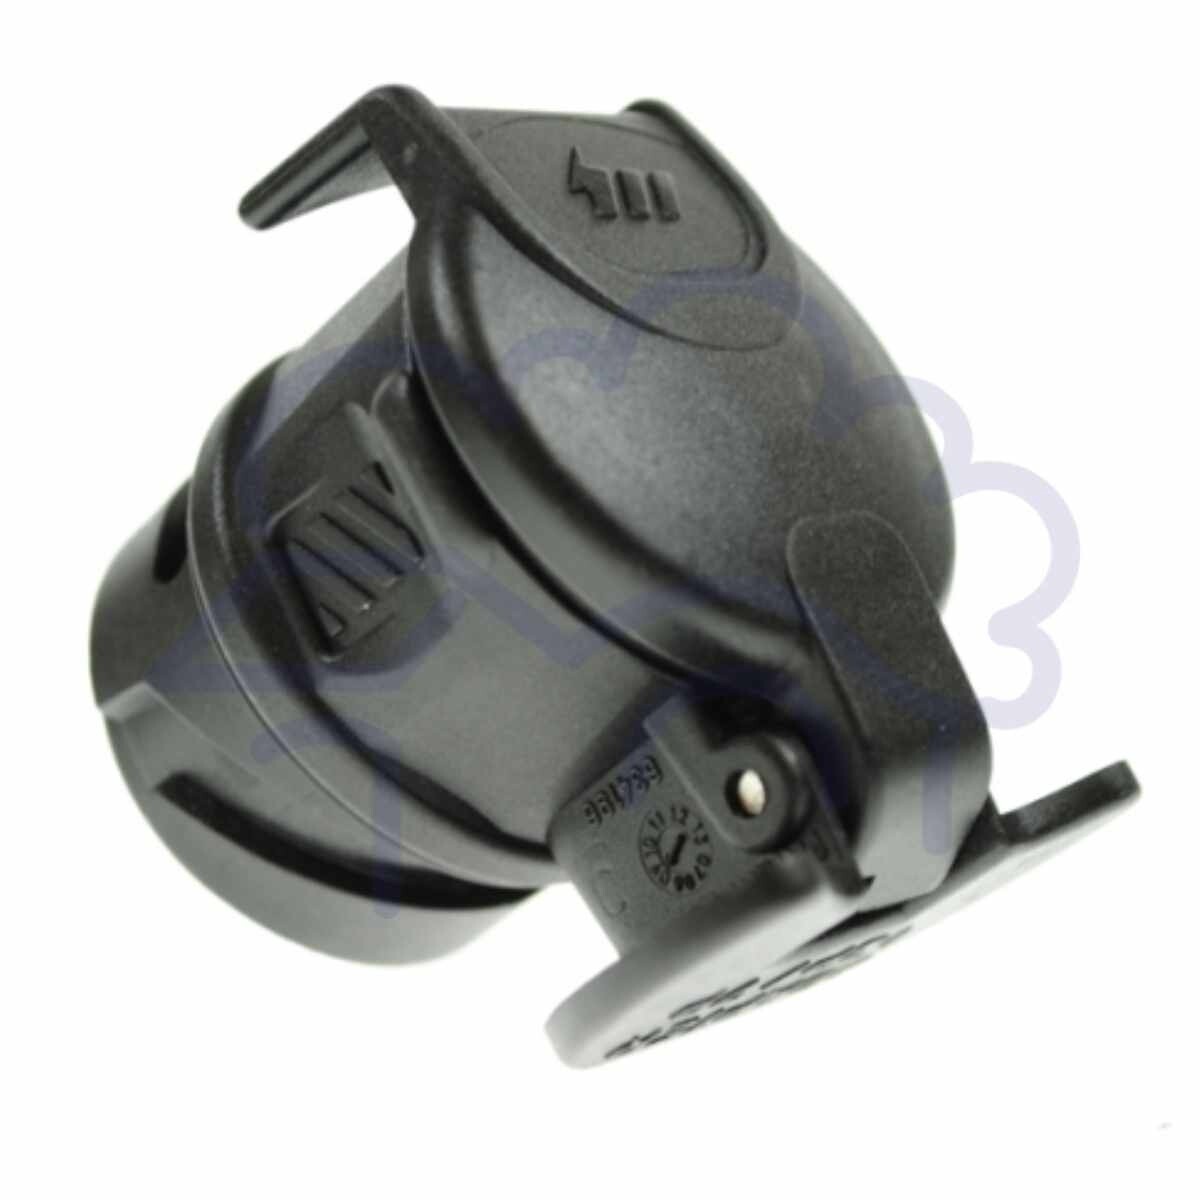 13v to 7t professional adapter